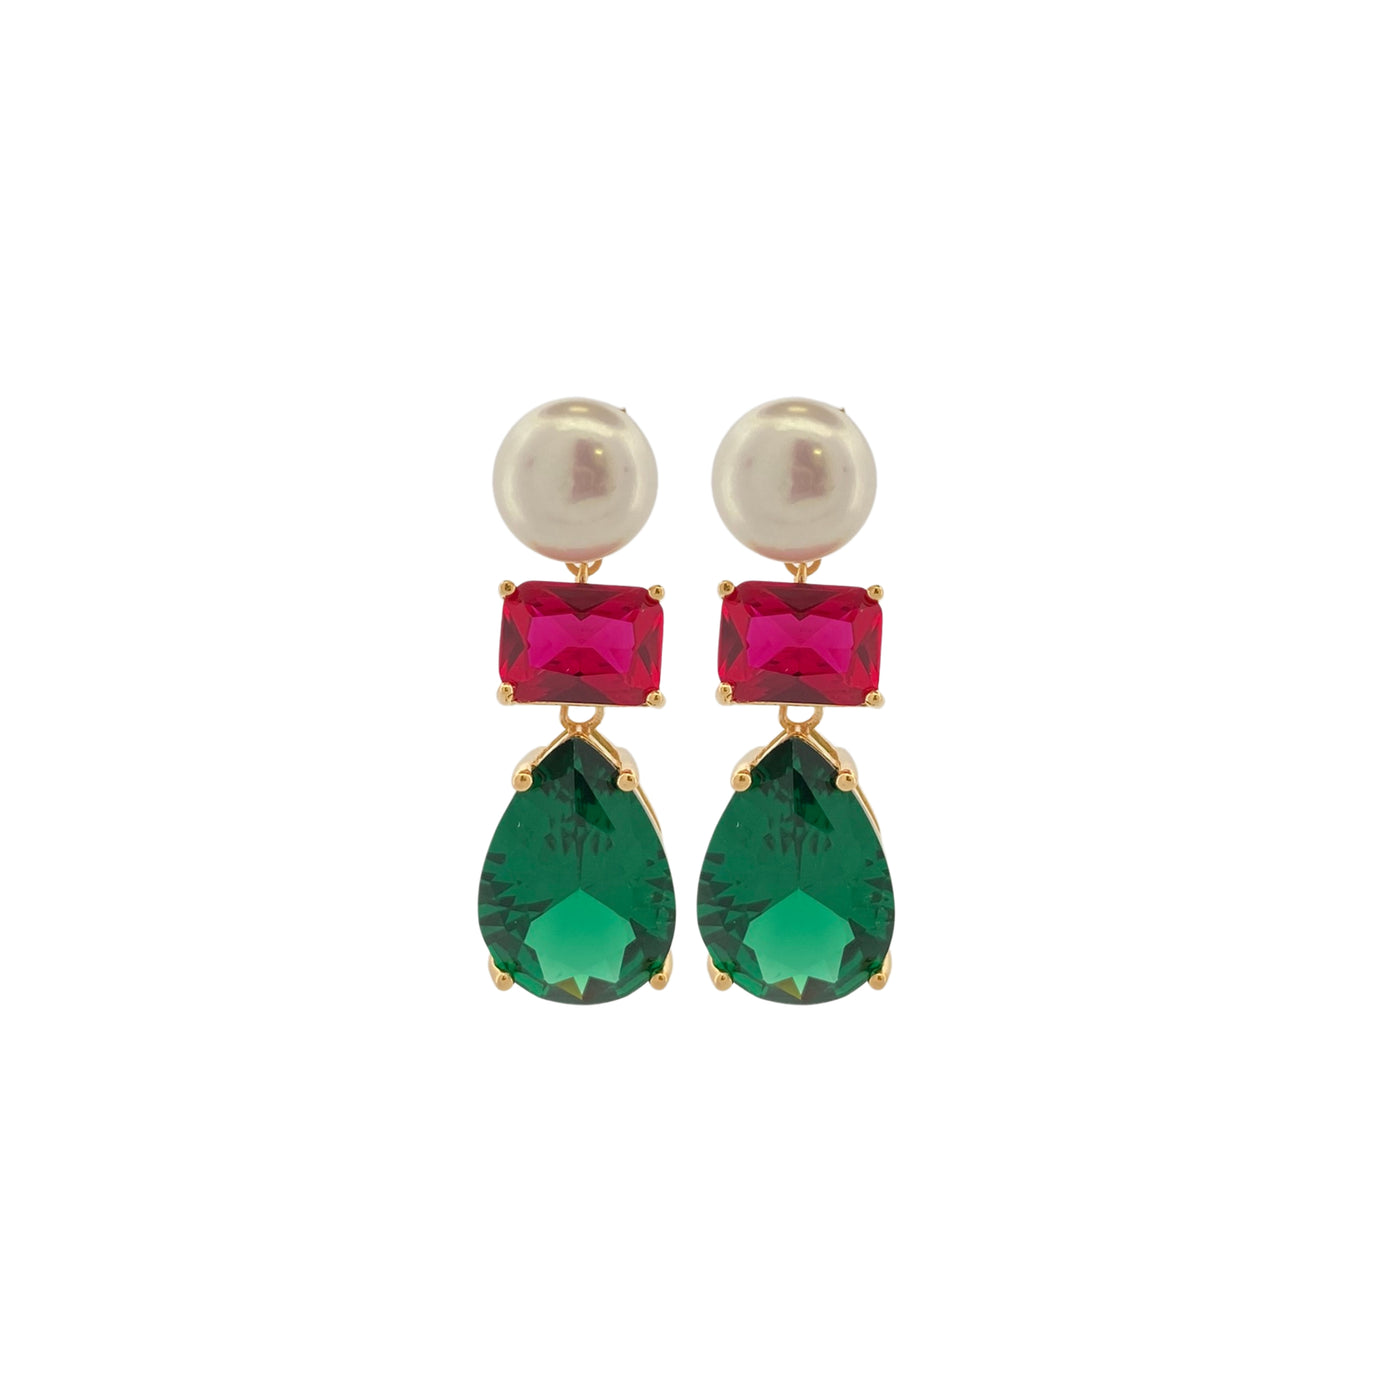 EARRINGS WITH STONES AND PEARL